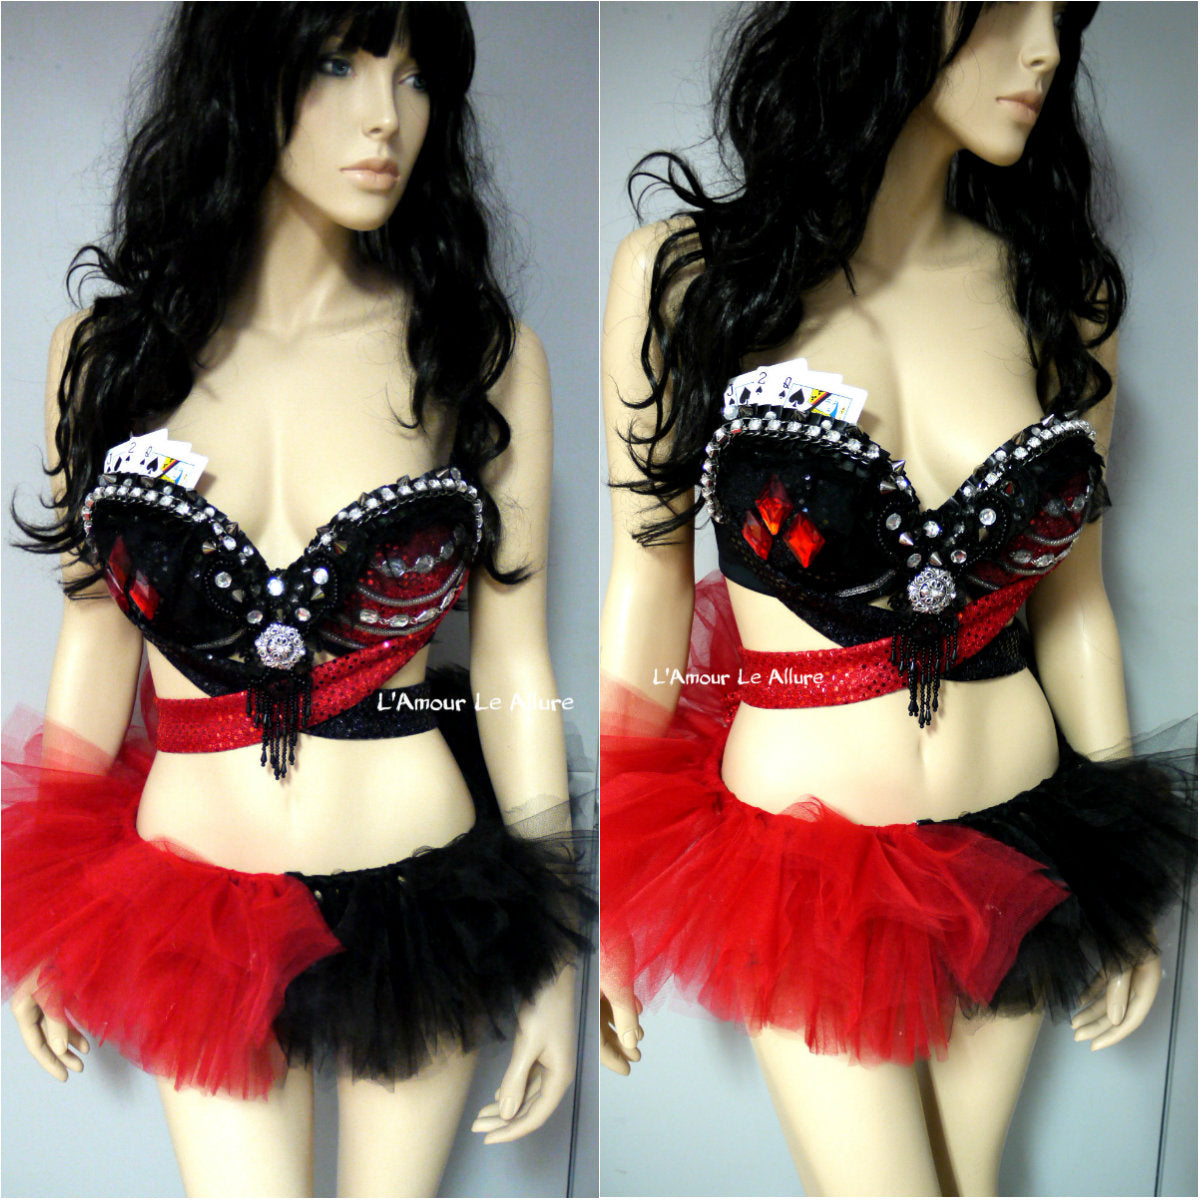 Queen of Hearts Rave Bra/ Rave Bra Outfit 